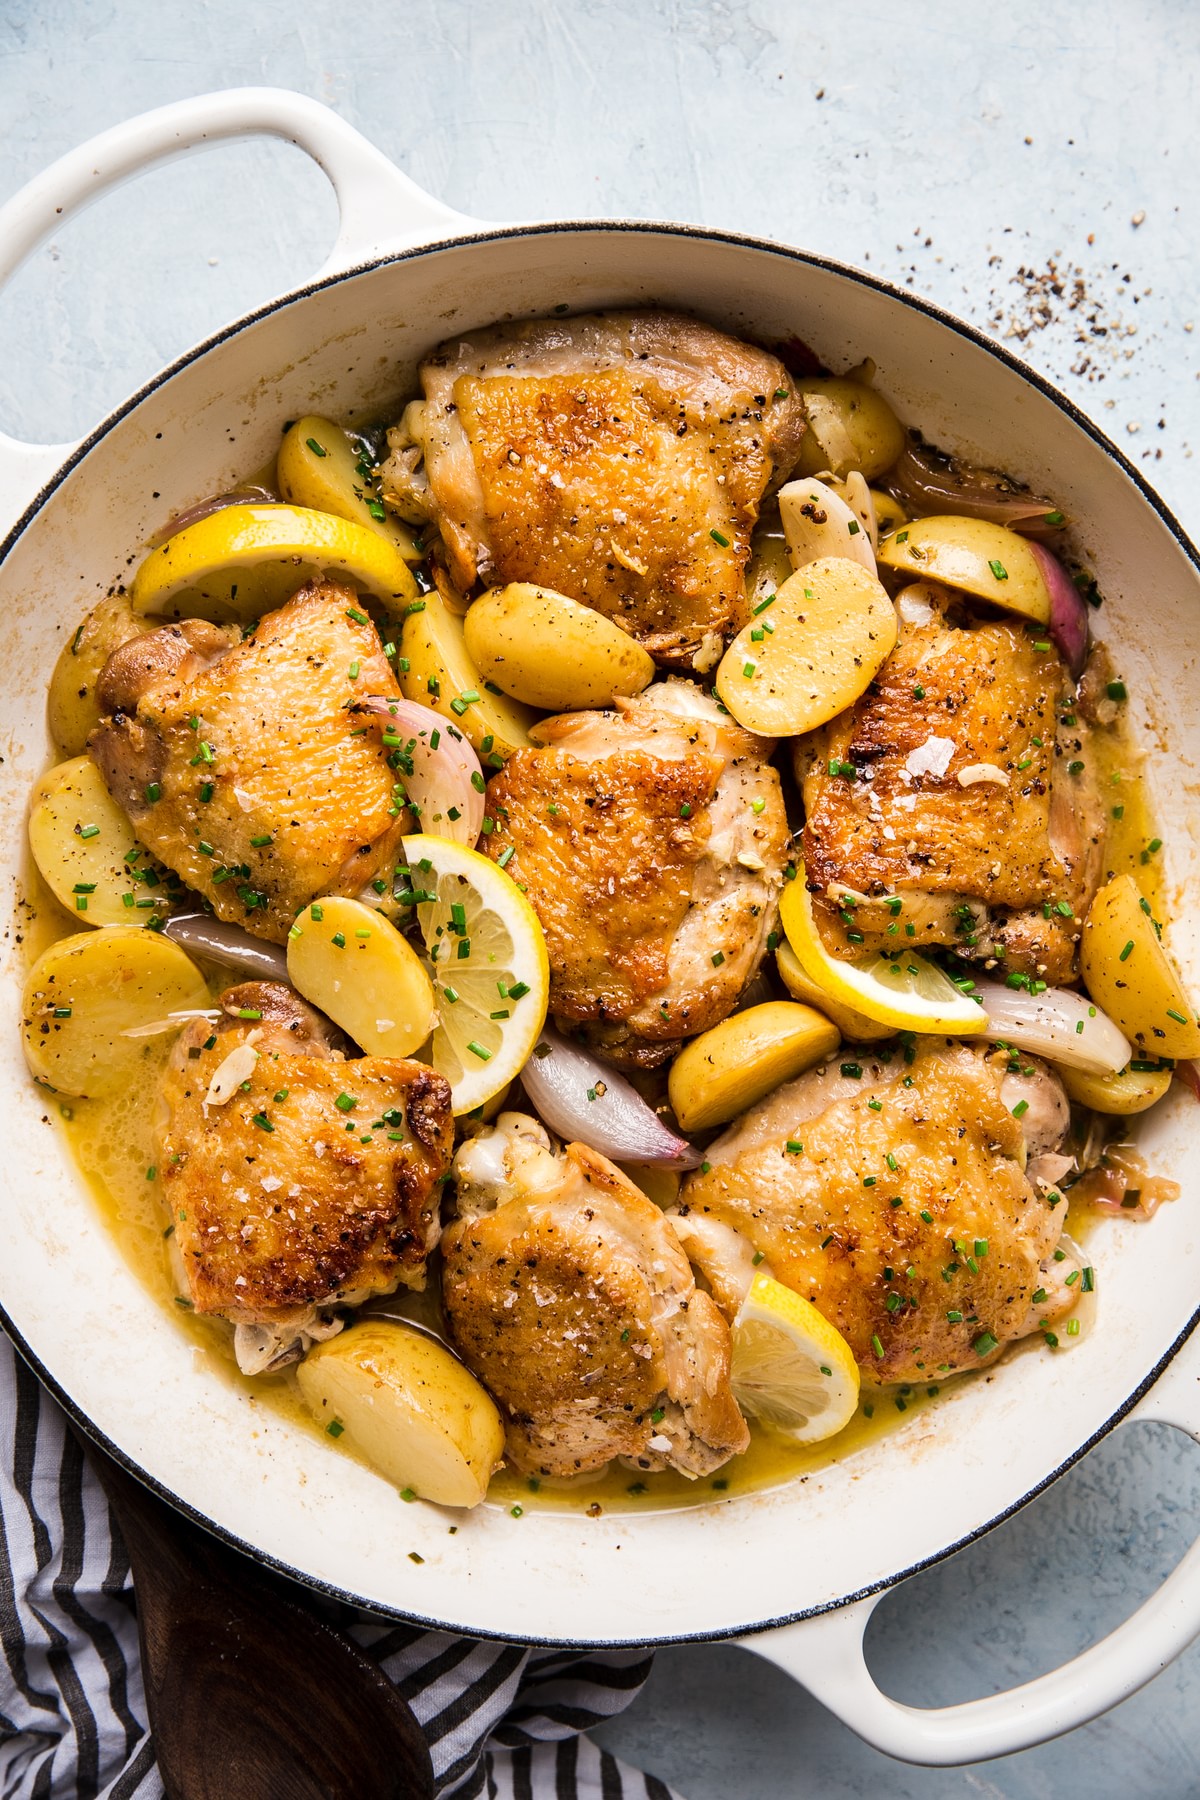 Braised Chicken with Potatoes, shallots, lemons in a white braiser with Chive Butter Sauce